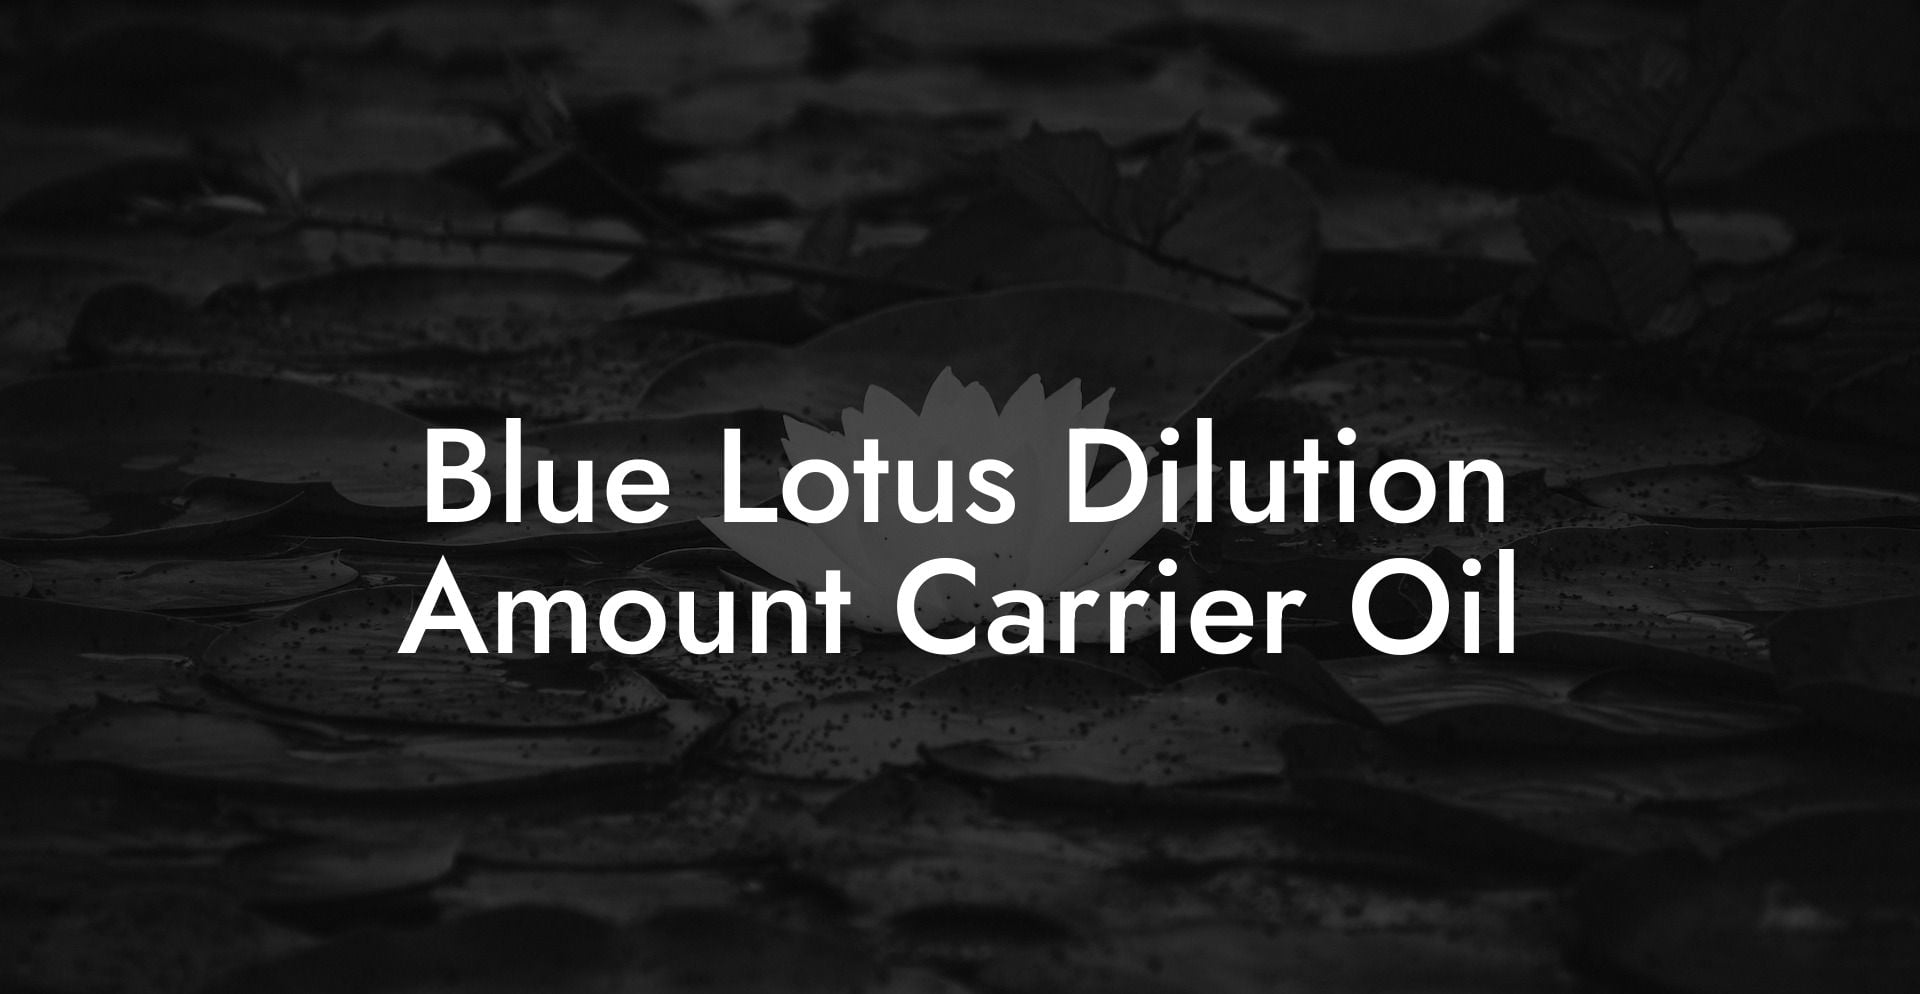 Blue Lotus Dilution Amount Carrier Oil